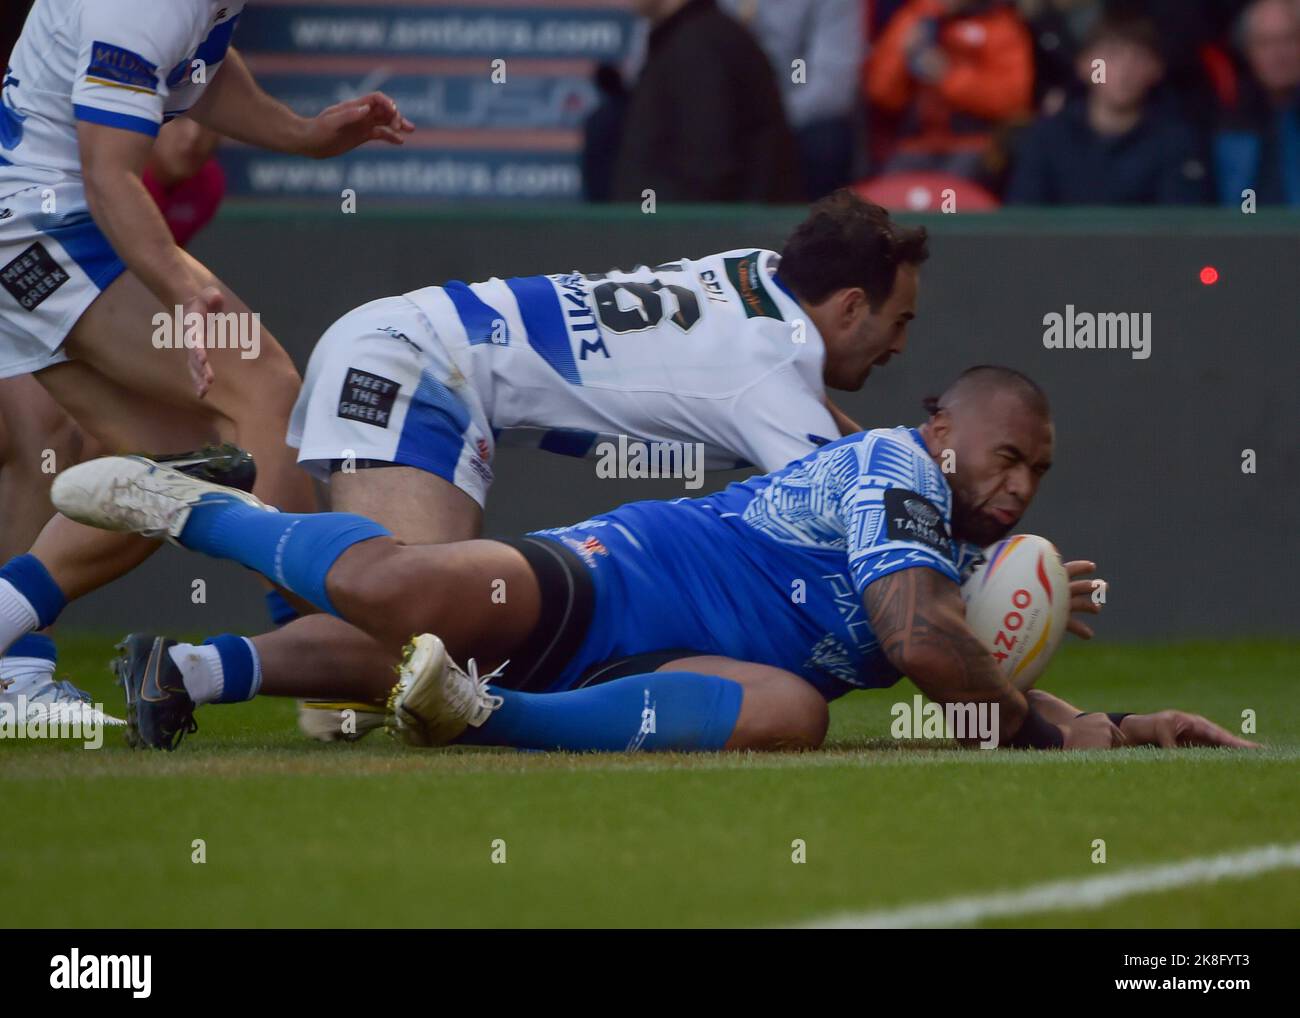 Doncaster, South Yorkshire, UK on October 23, 2022 Junior Paulo of Samoa scores a try   Rugby League World Cup 2021 group A match between Samoa V Greece at the Eco-Power Stadium, Doncaster, South Yorkshire, UK on October 23, 2022   (Photo by Craig Cresswell/Alamy Live News) Stock Photo